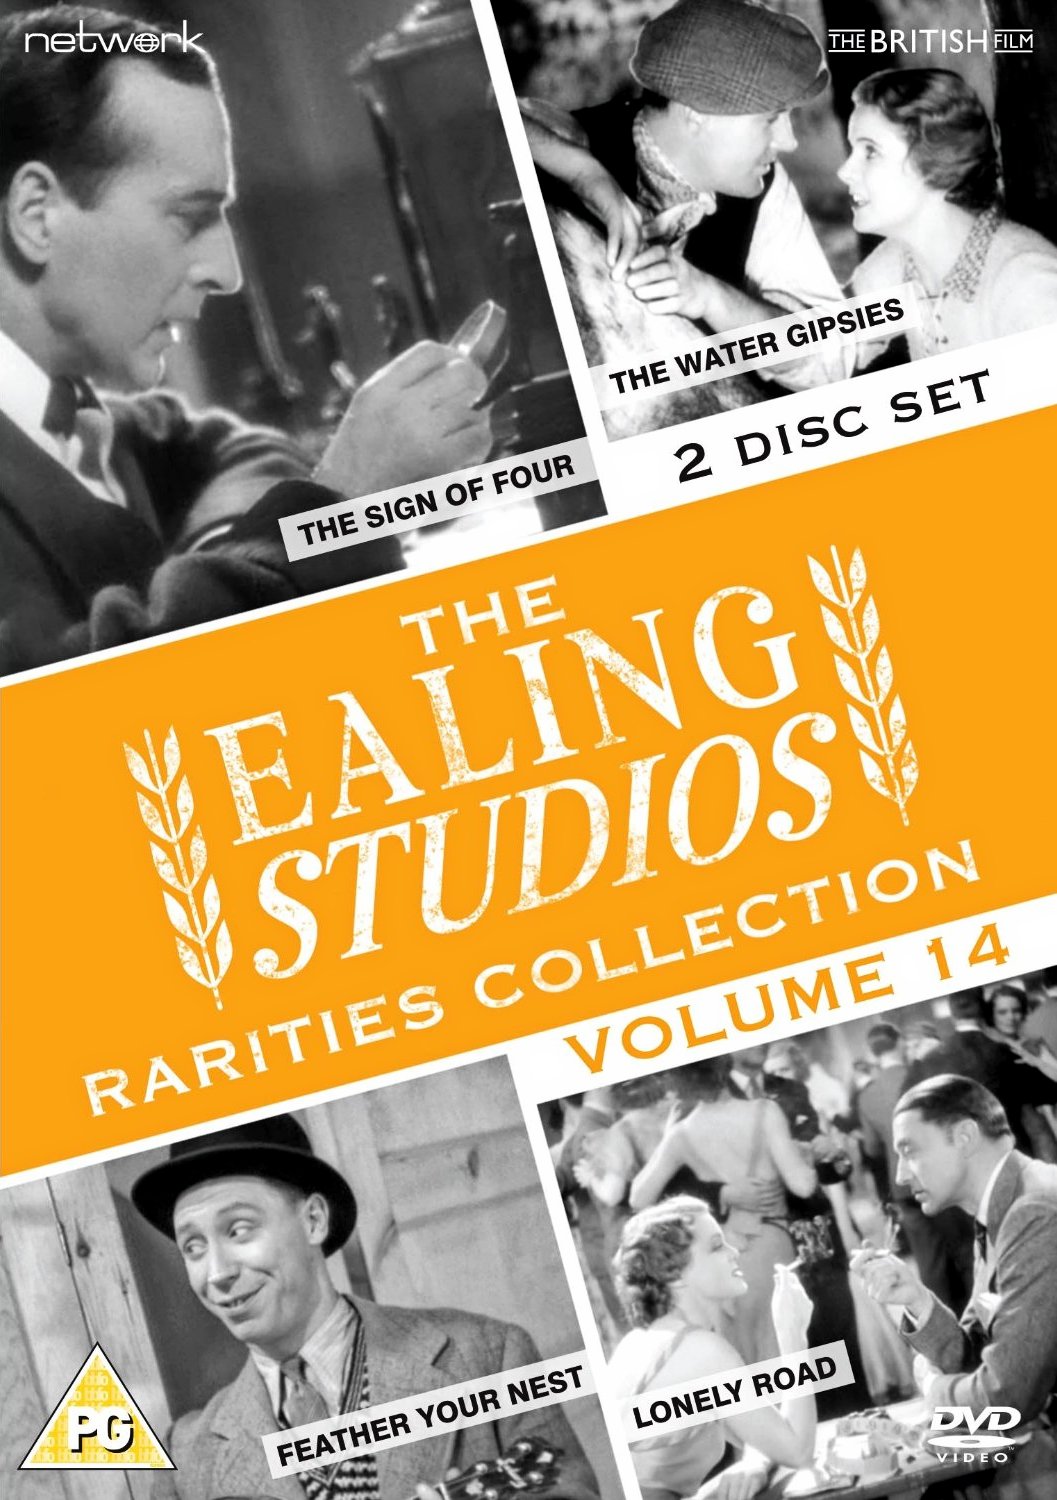 The Ealing Studios Rarities Collection DVD – Volume 14 from Network as part of the British Film collection. Features The Sign of Four, The Water Gipsies, Feather Your Nest, Lonely Road.